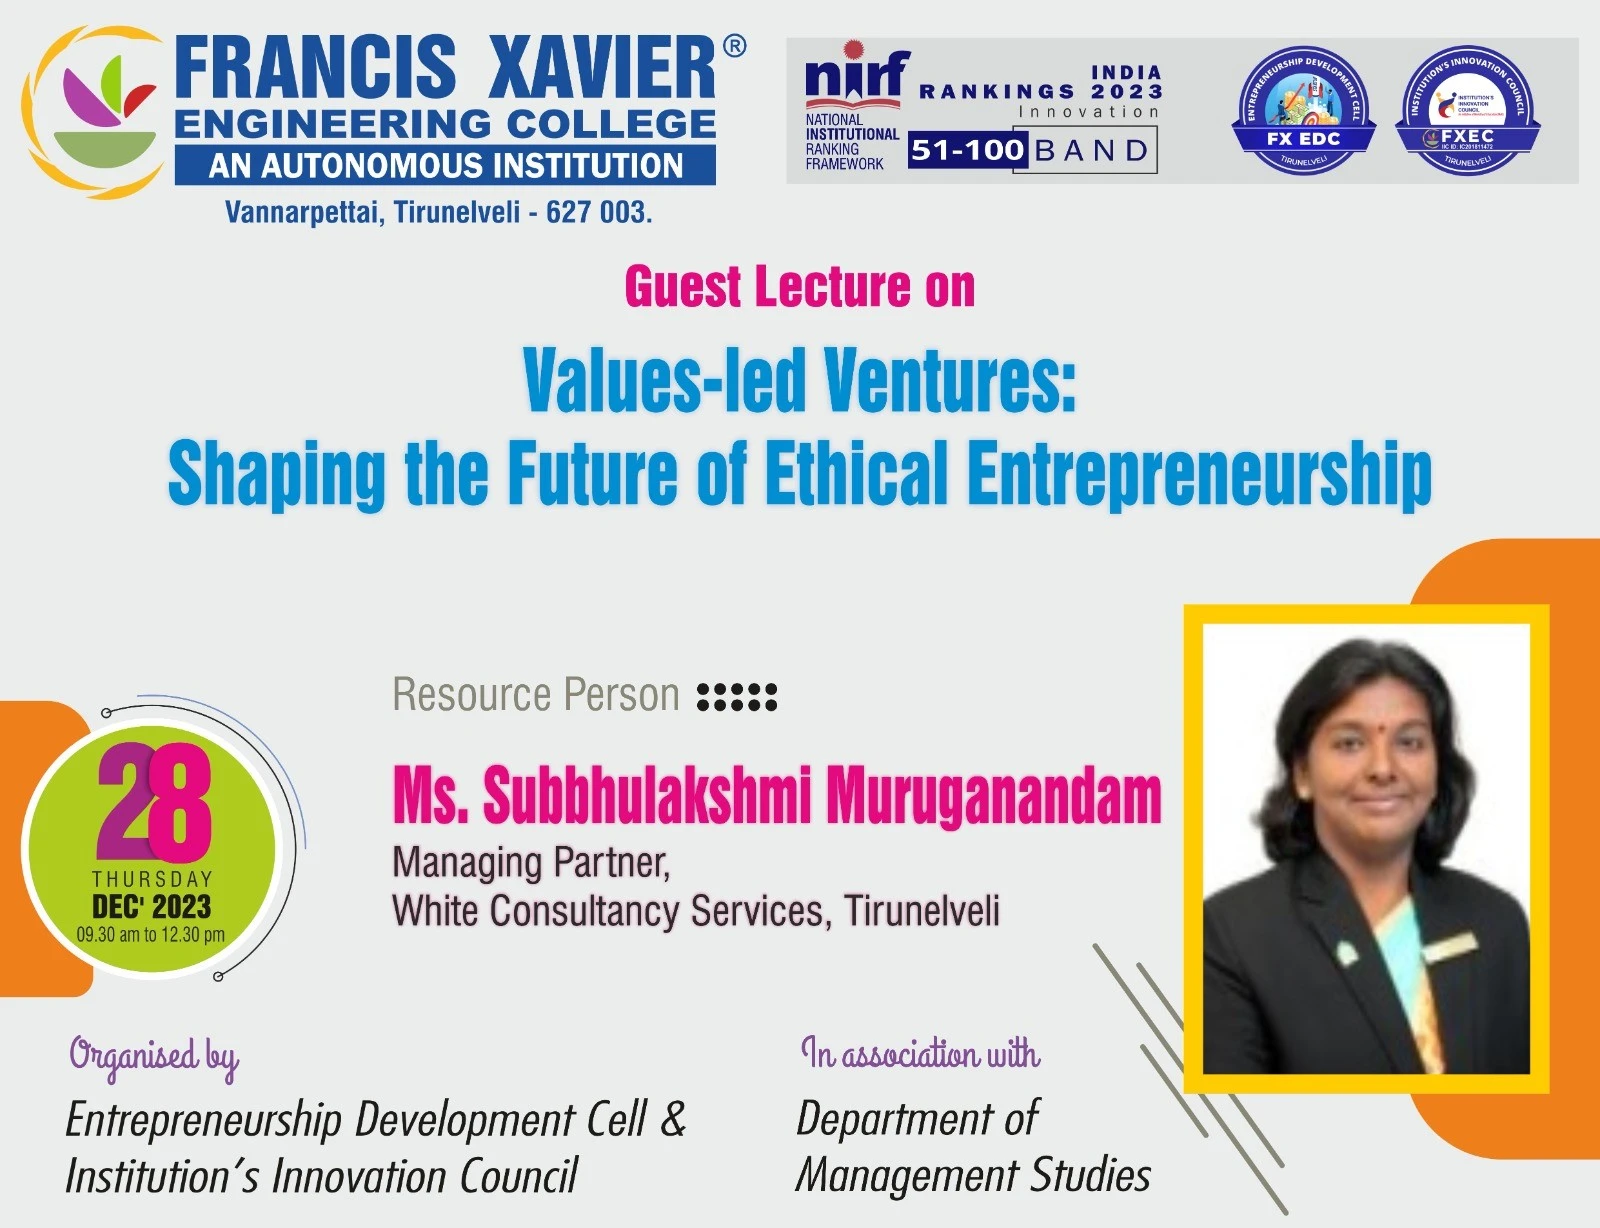 Guest lecture on Values- led Ventures: Shaping the future of ethical entrepreneurship